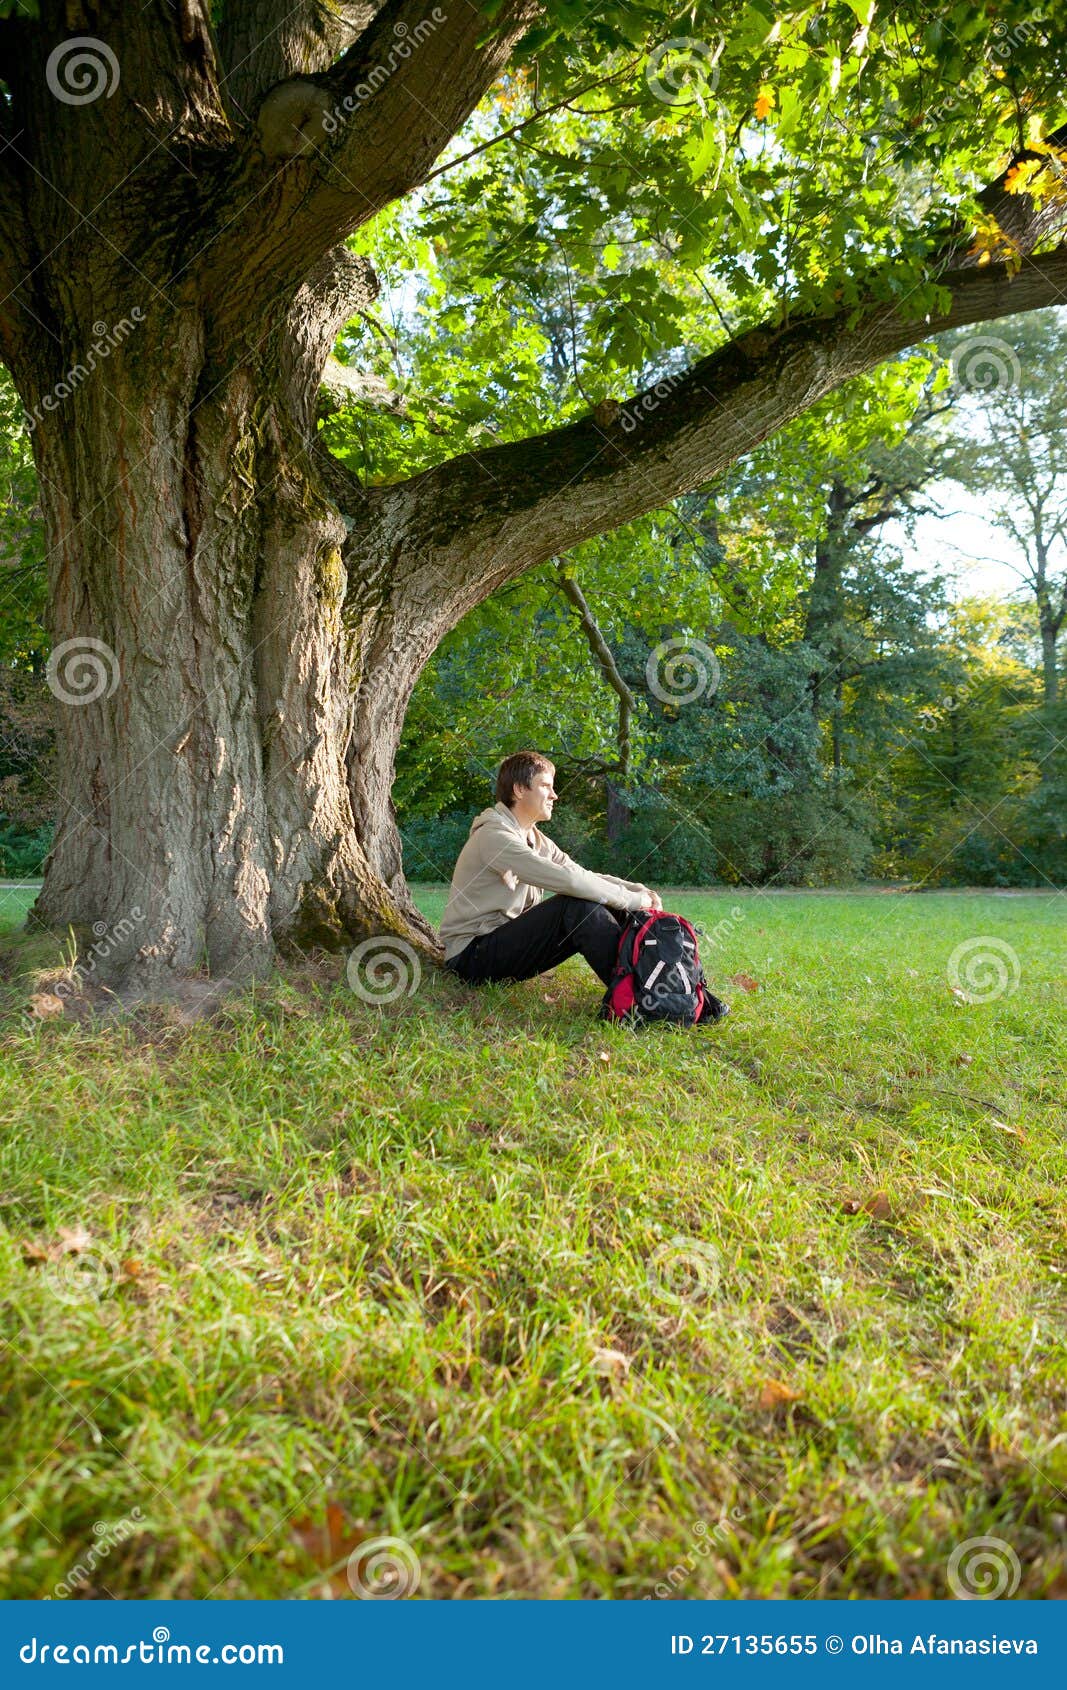 Man Is Sitting Resting Under Tree Stock Image - Image of outdoor